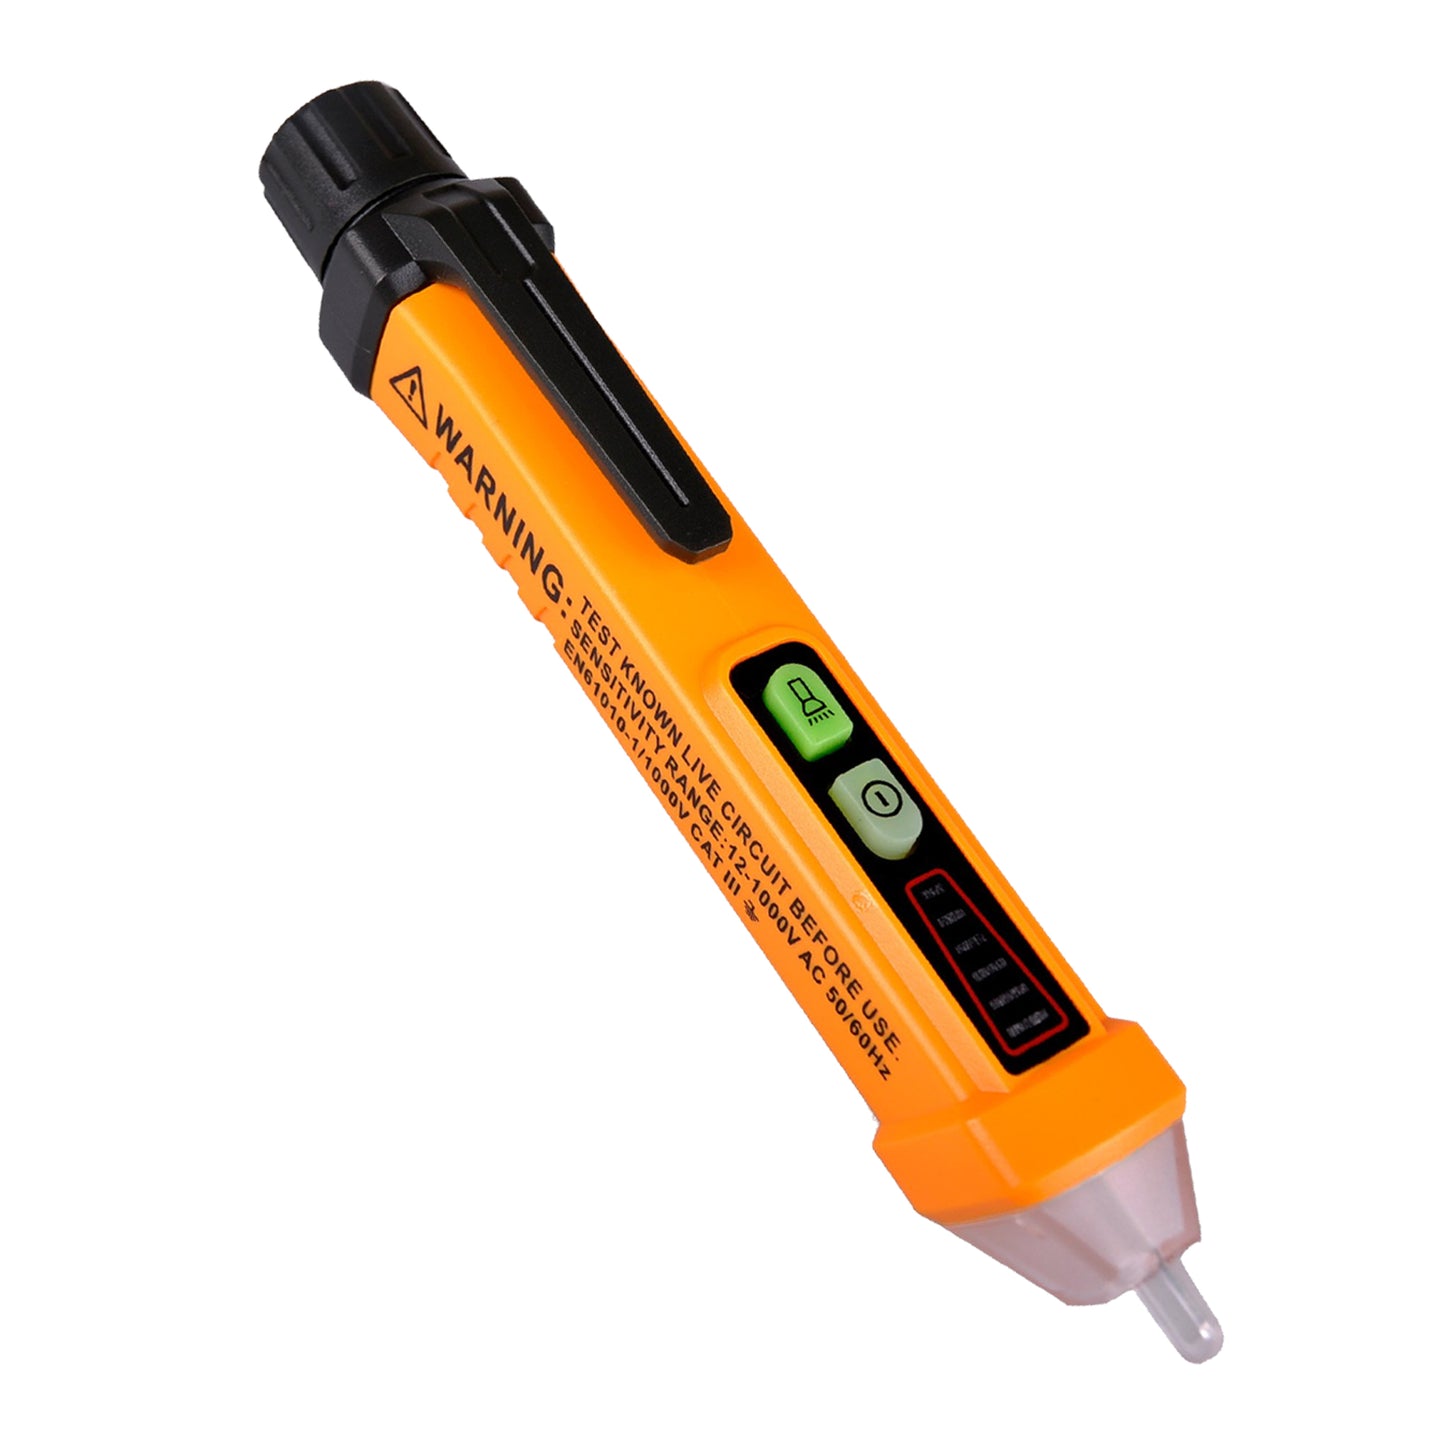 PeakMeter PM8908C Non-contact AC Voltage Detector Tester Meter 12V-1000V Pen Style Voltage Detector